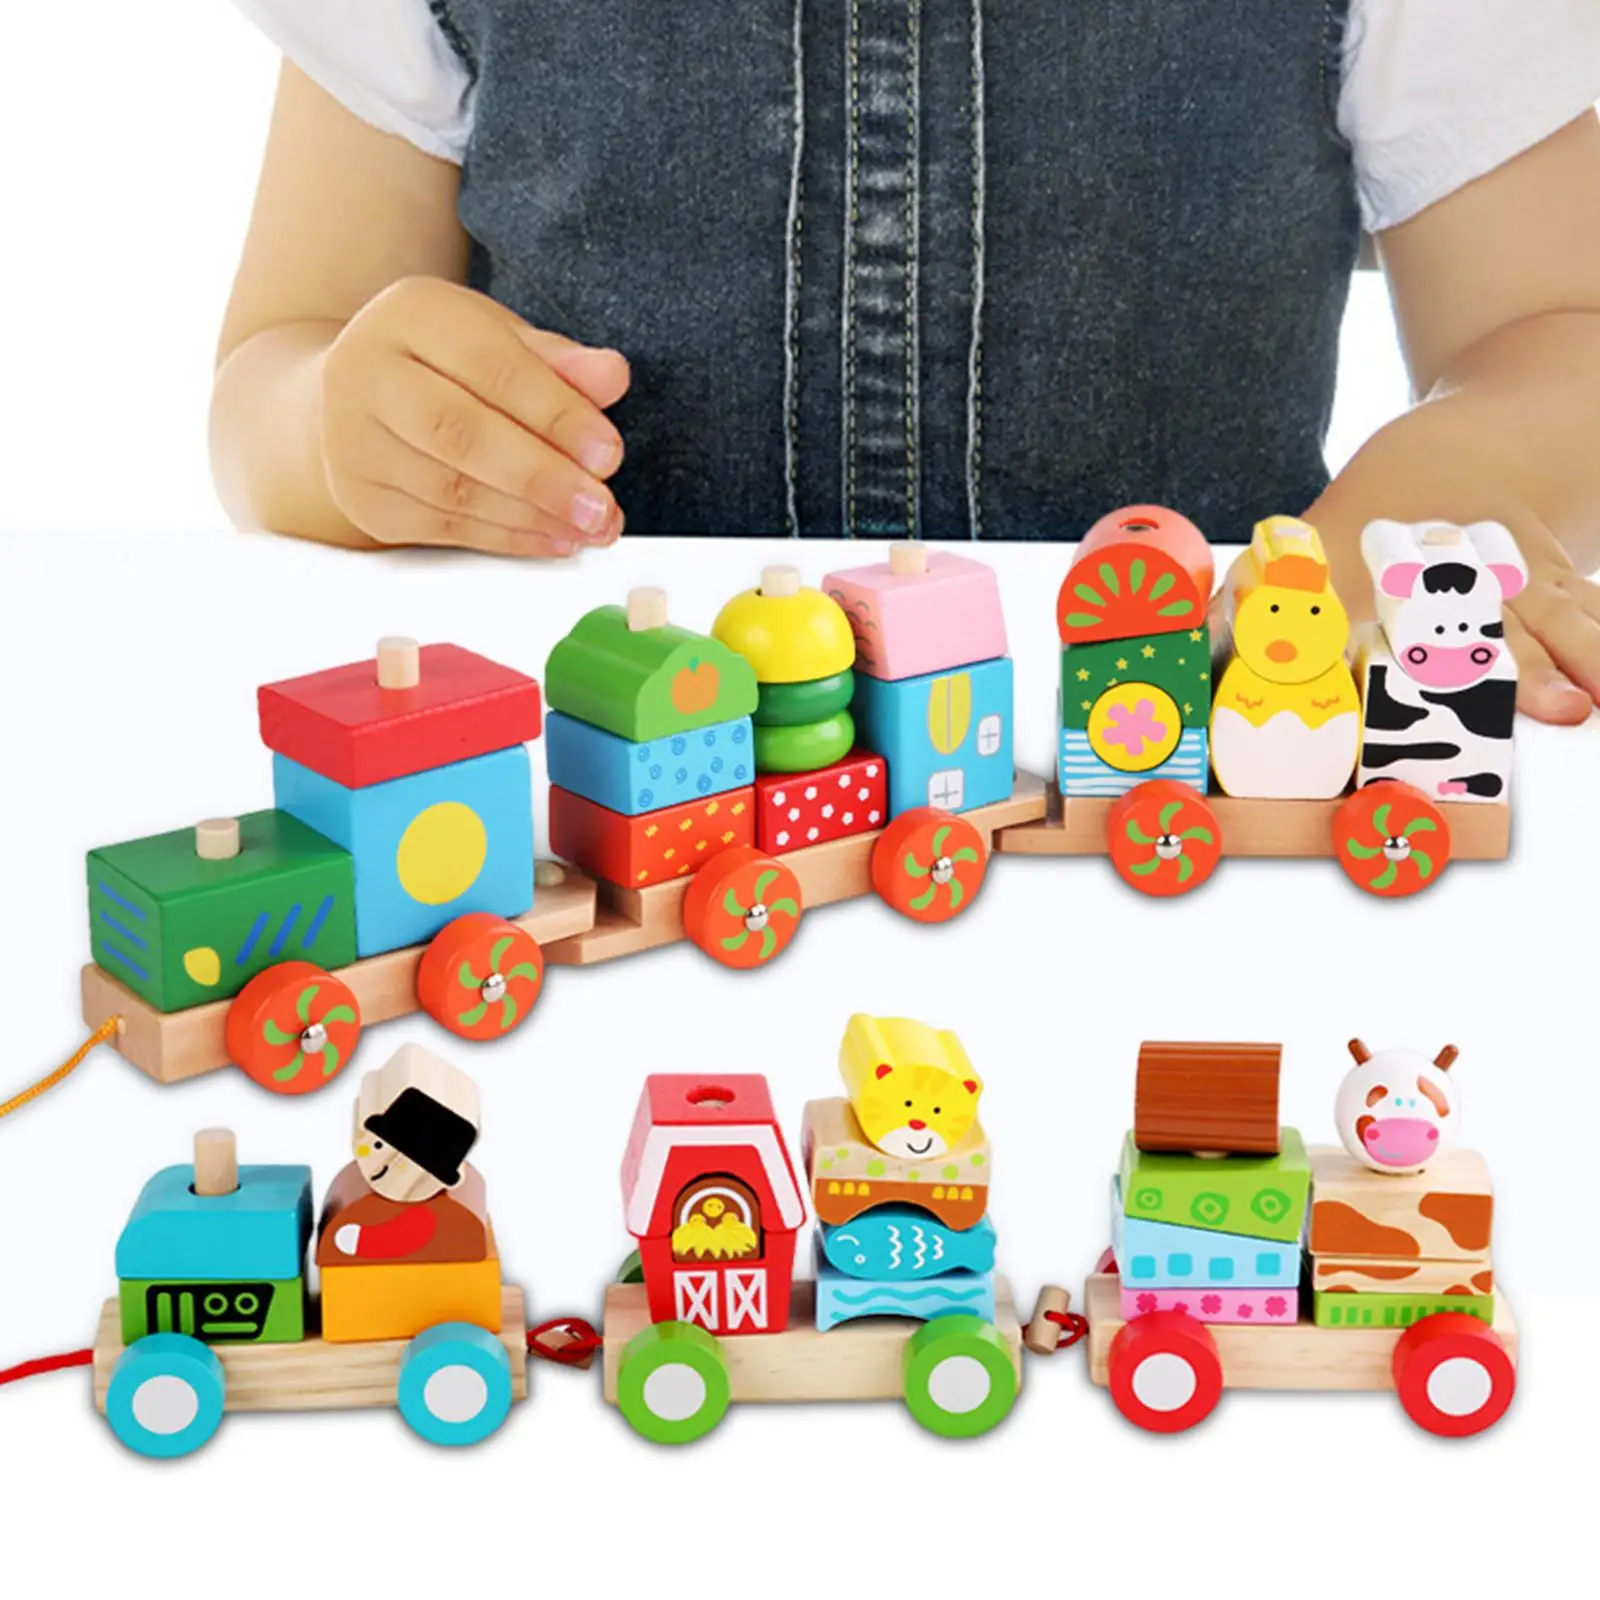 Wooden Small Trains, Smooth Attractive Fun Classic Wooden Toddler Toy,Baby Toys Wood Train, for Kids Toddler